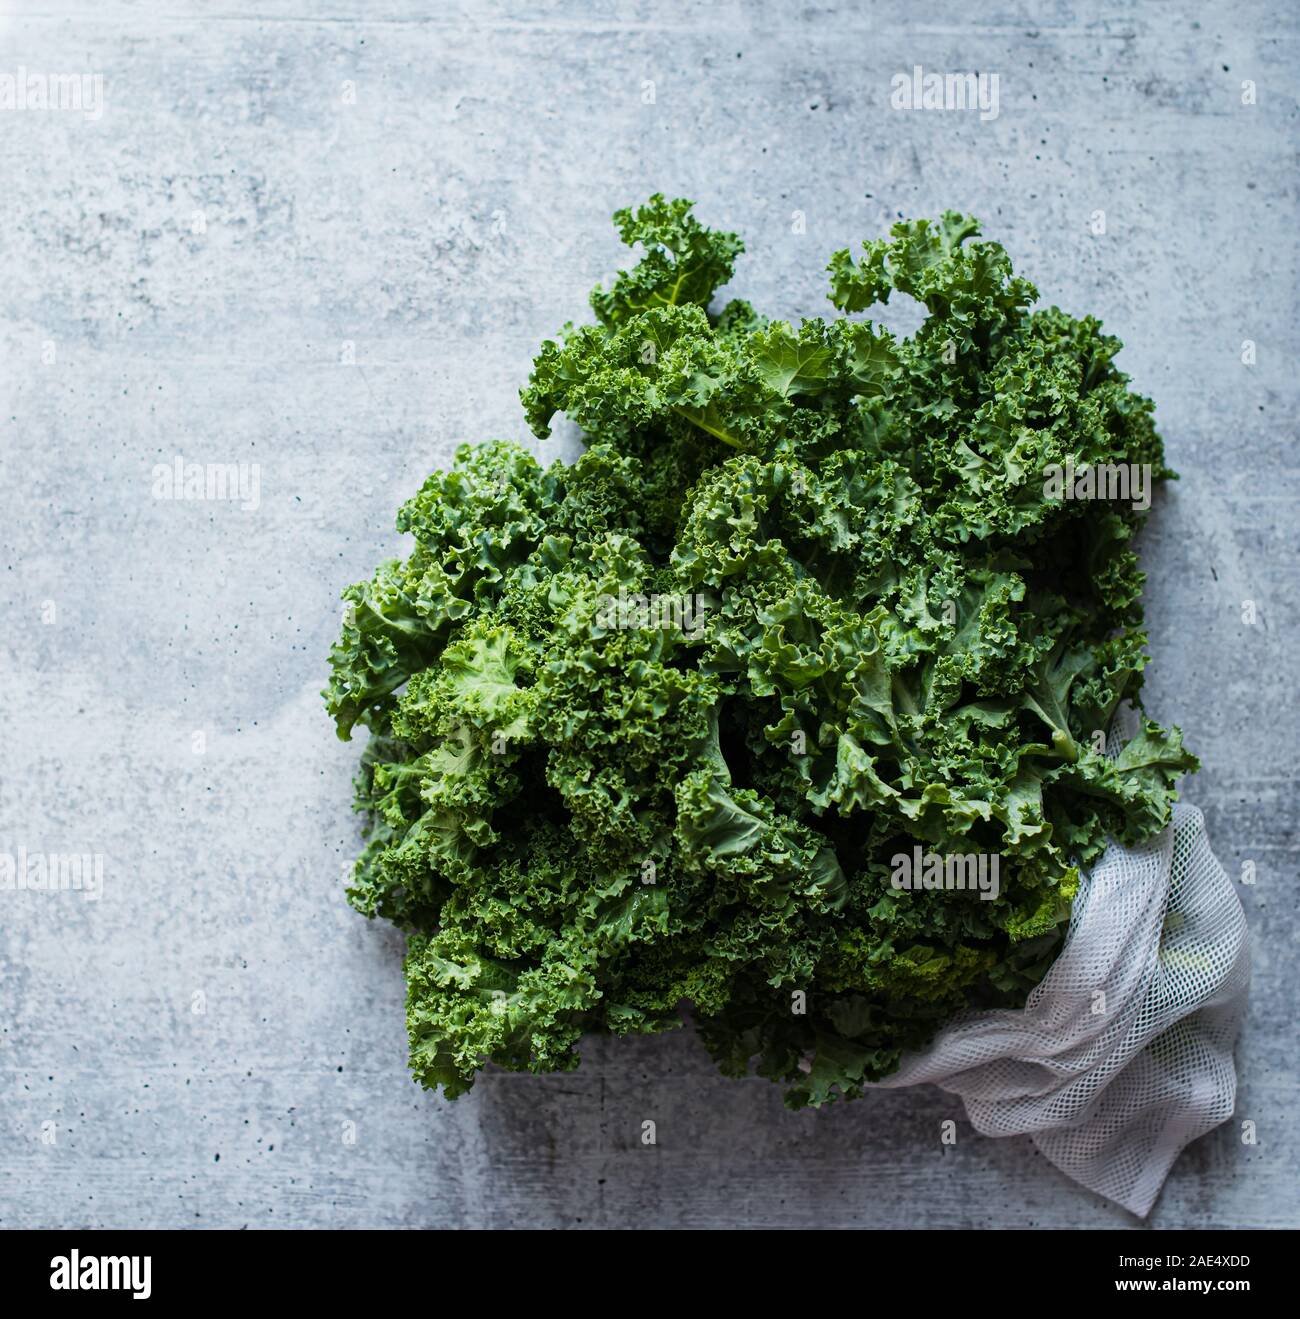 Overhead view of bunch of kale leaves against a cement counter. Stock Photo